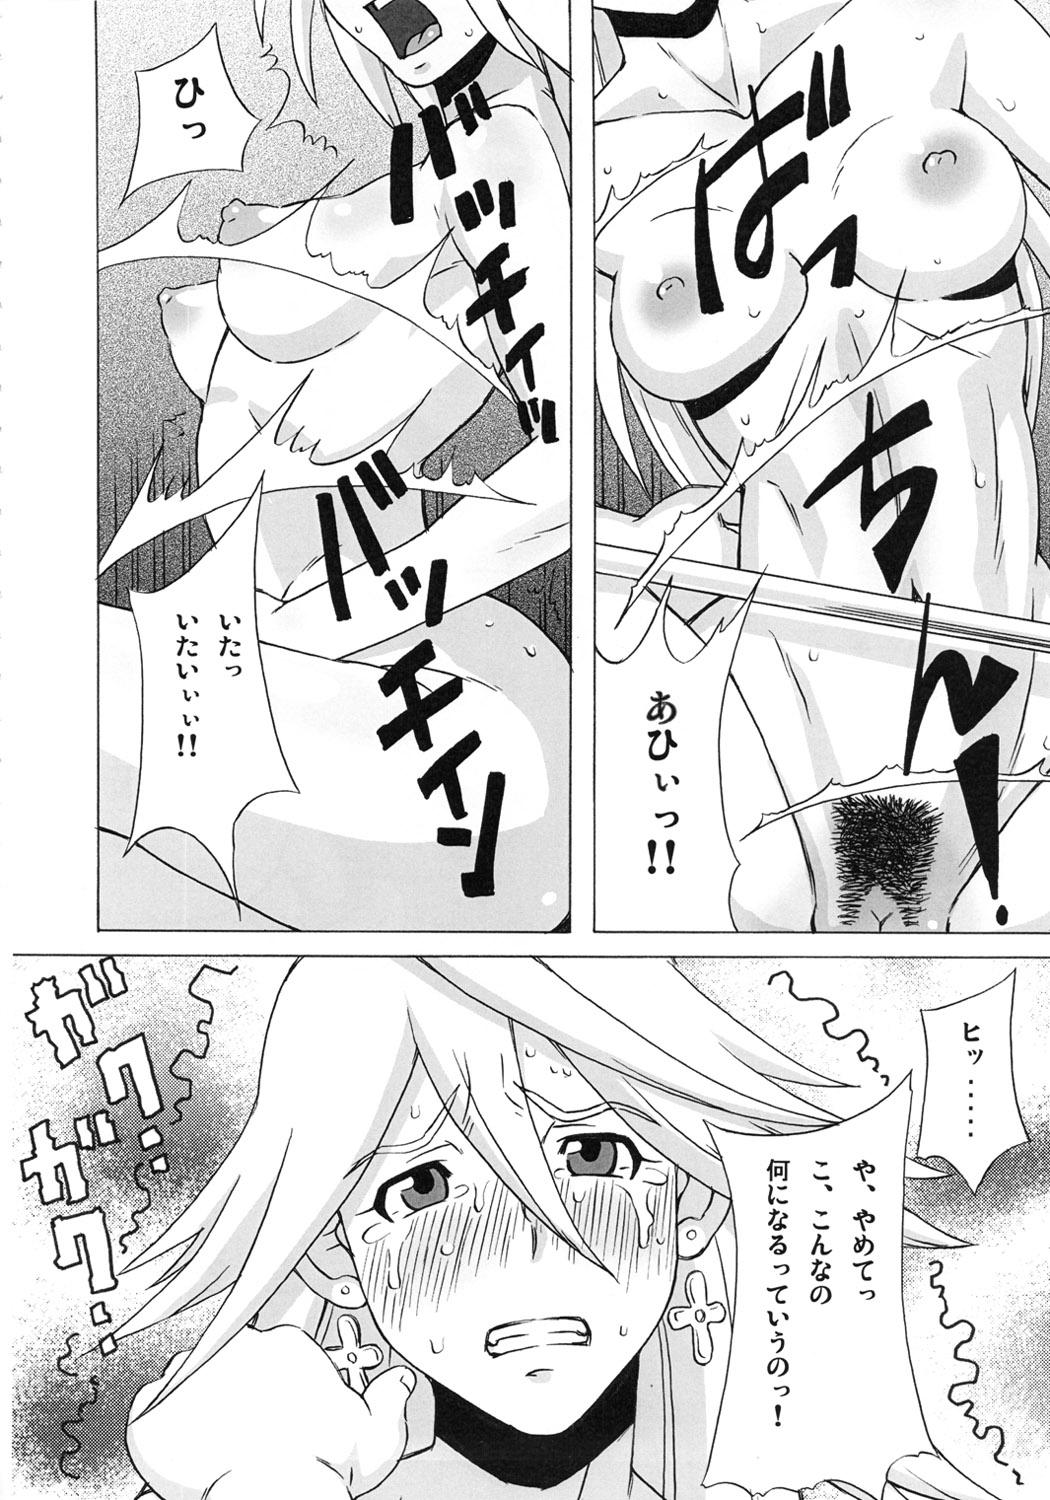 Anal Gape LAST STORY BADEND - The last story Students - Page 5